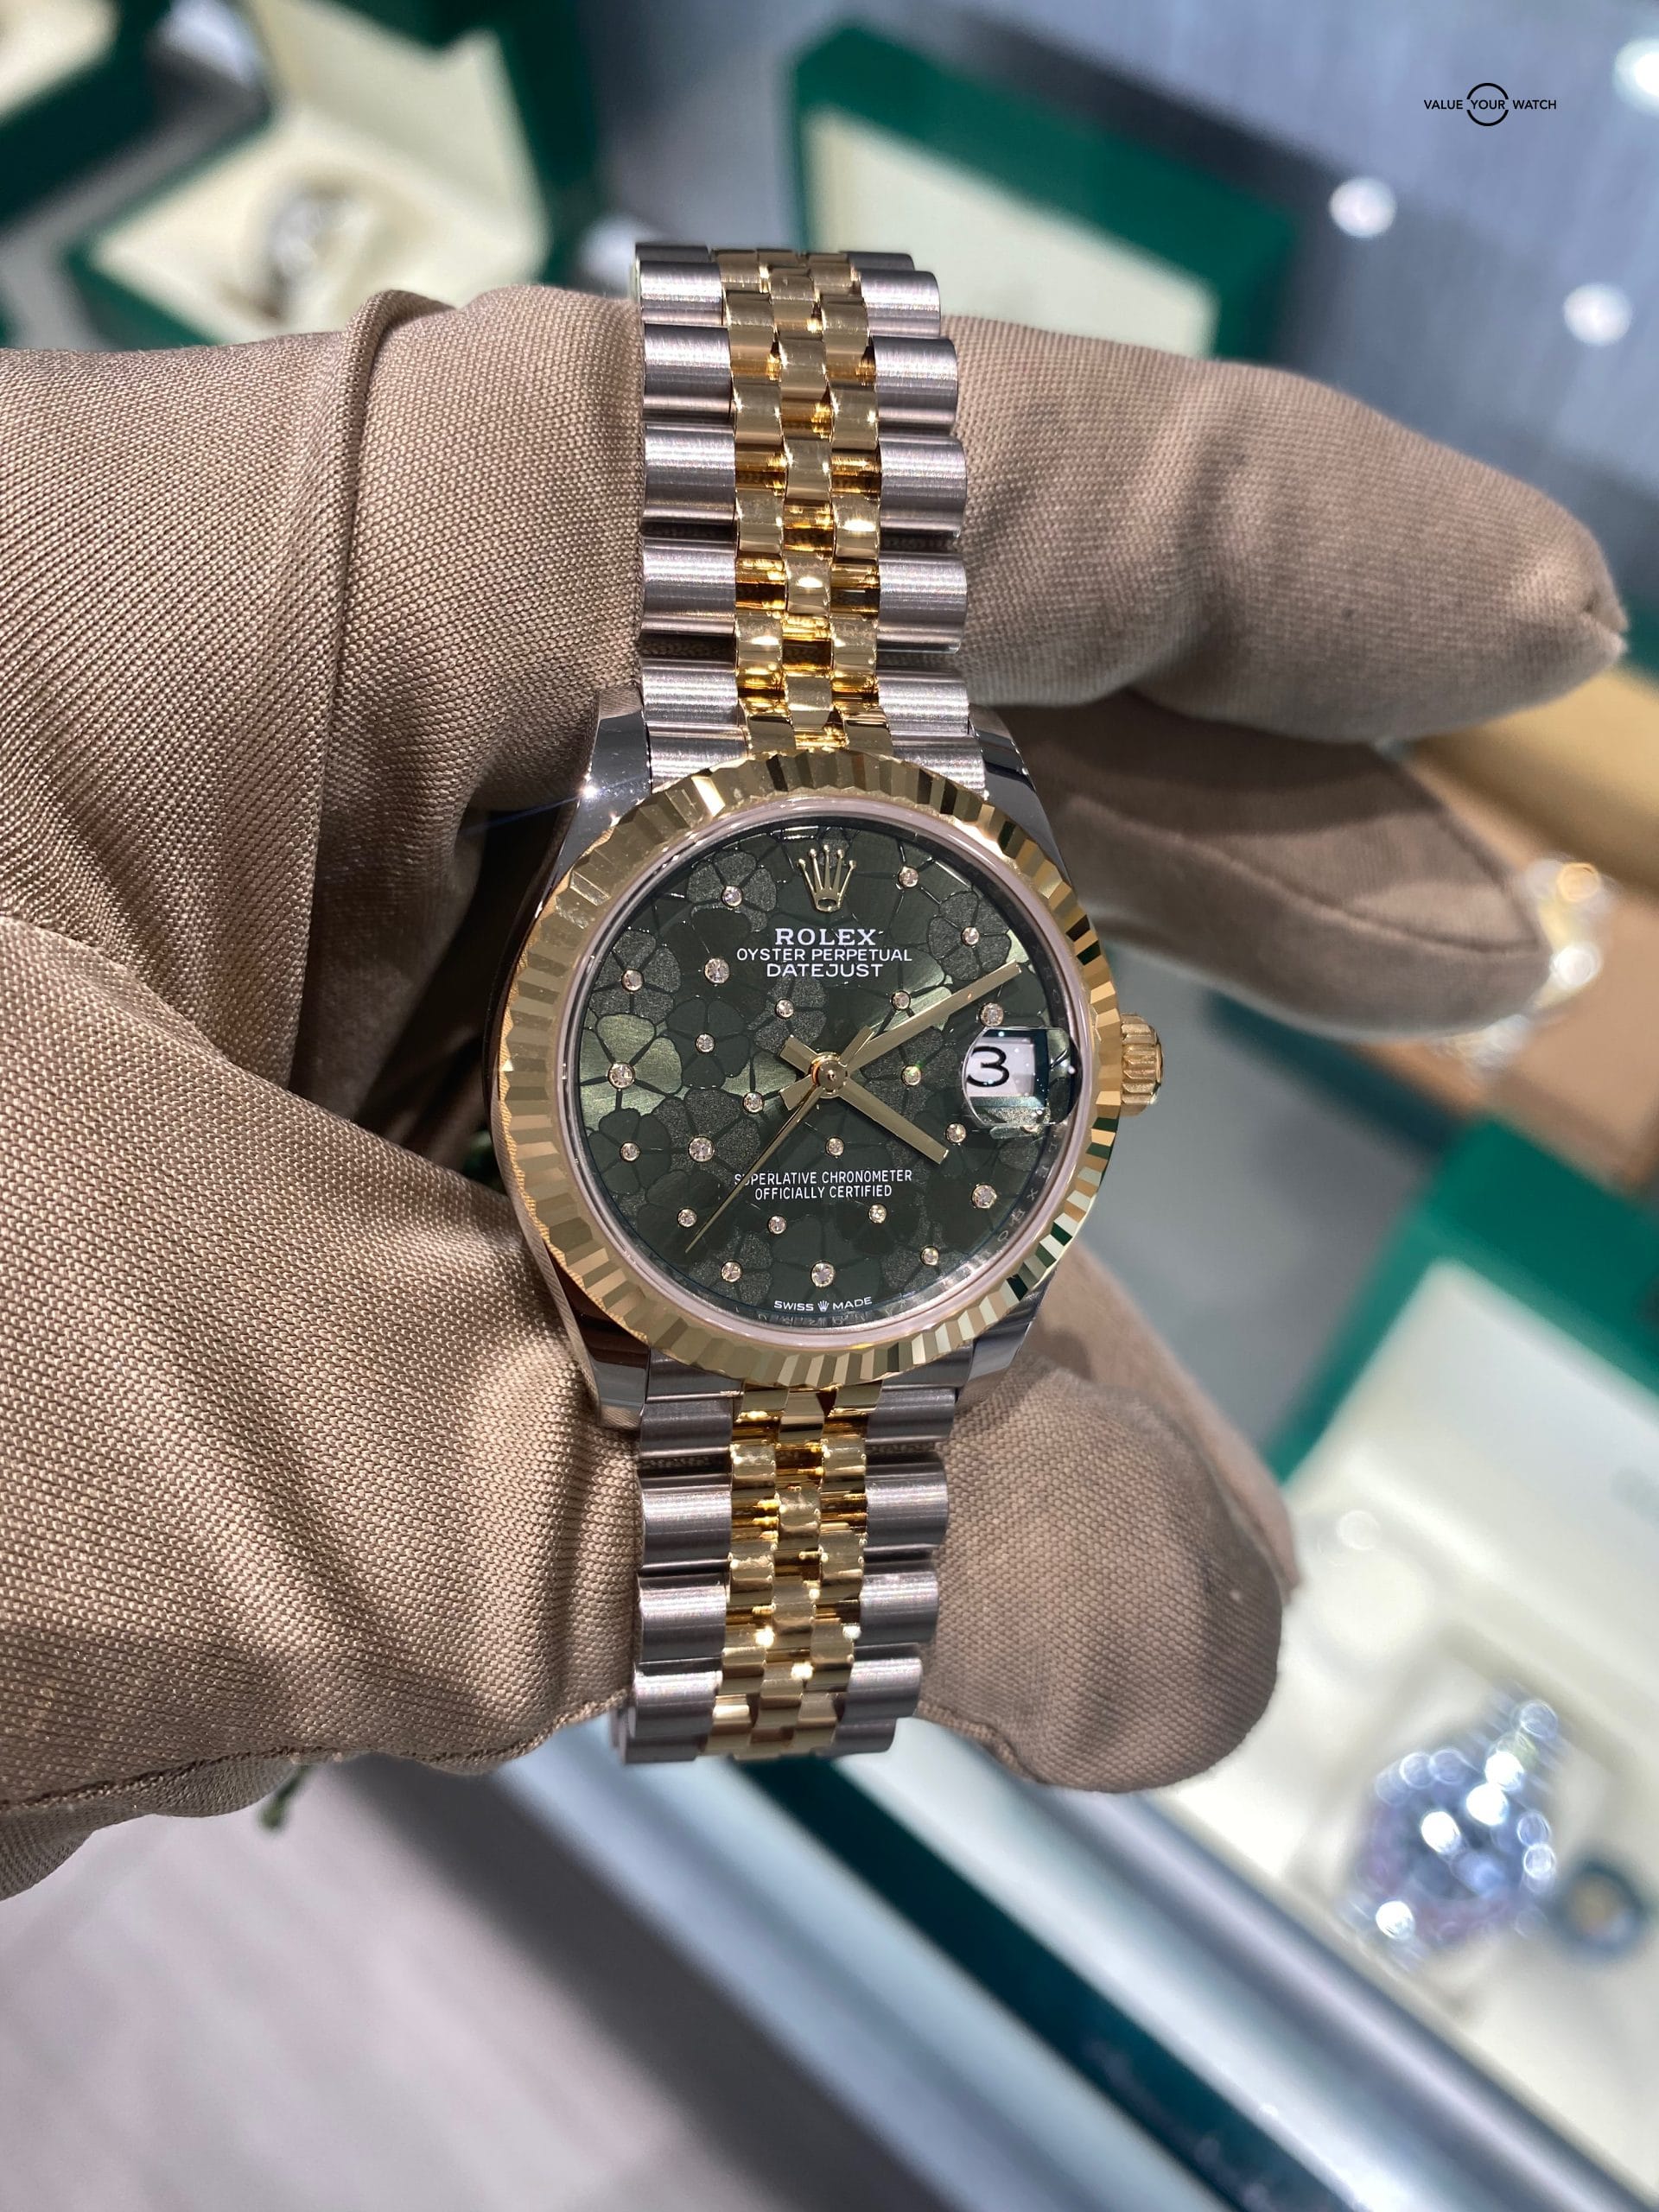 Rolex Datejust 31 Ladies Watch with Green Dial and Diamonds